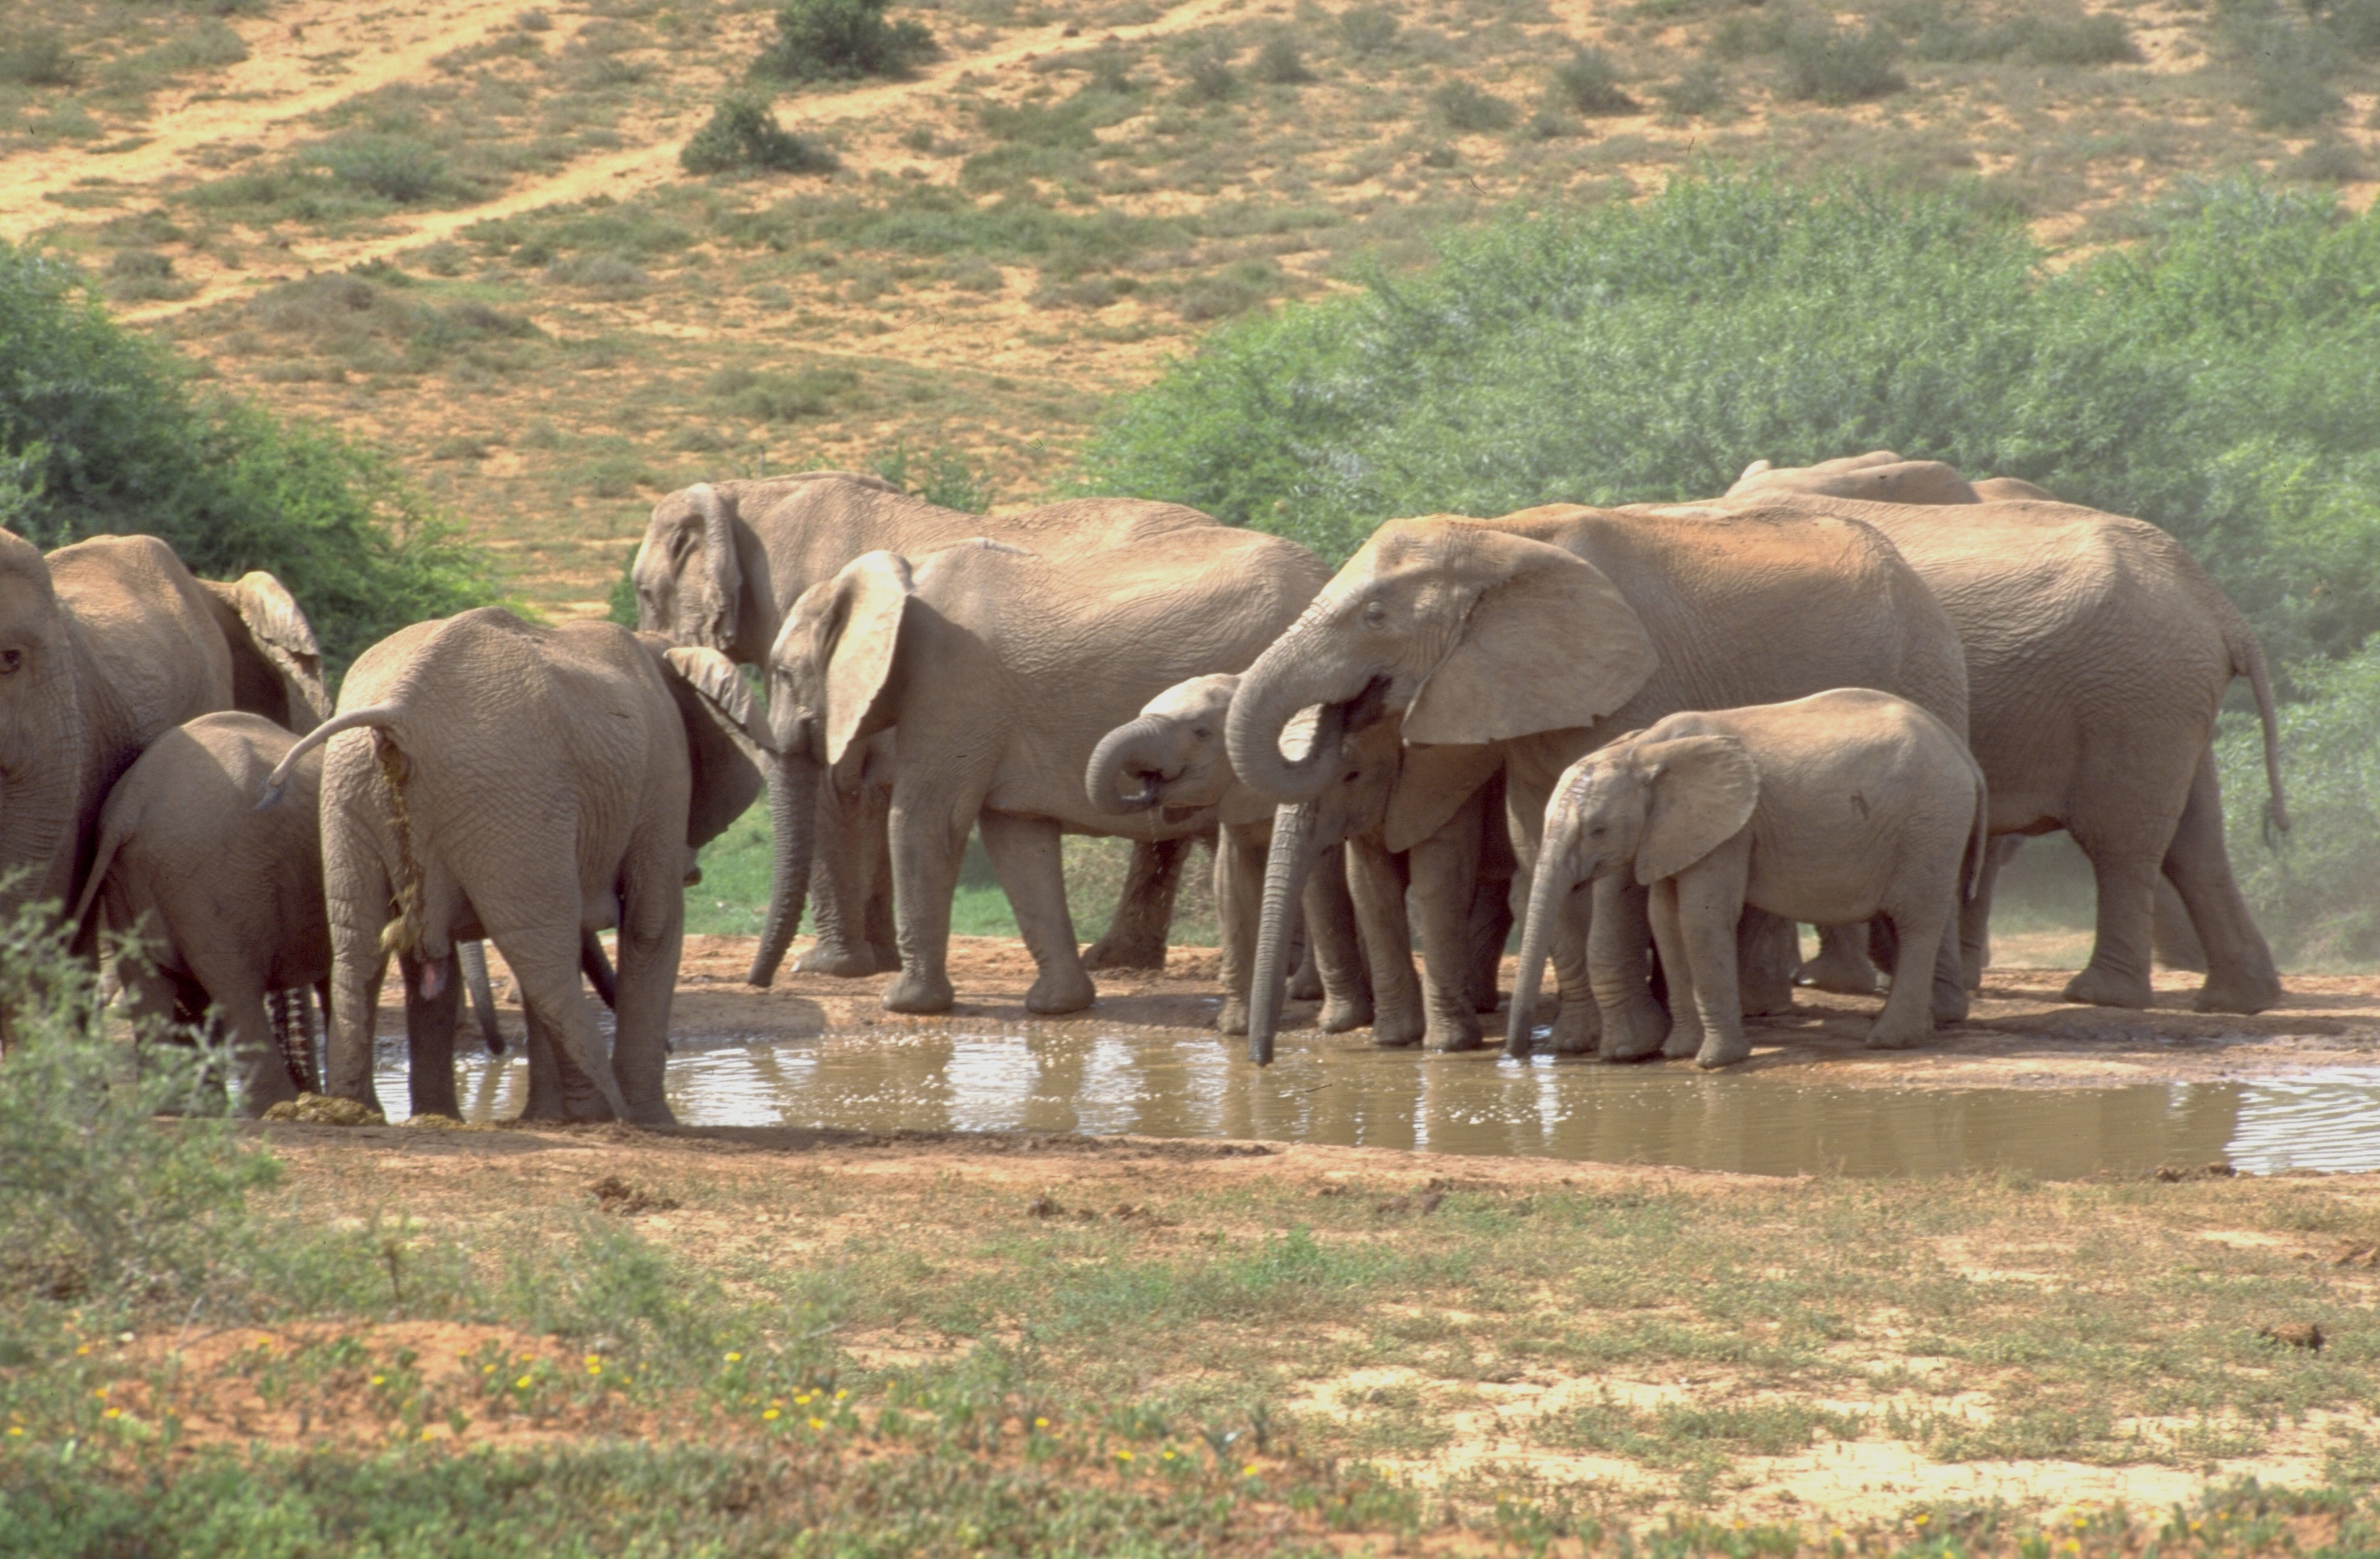 Elephants are enjoying the water whole in Addo Elefant National Park. The tourists love to see the elephants playing around